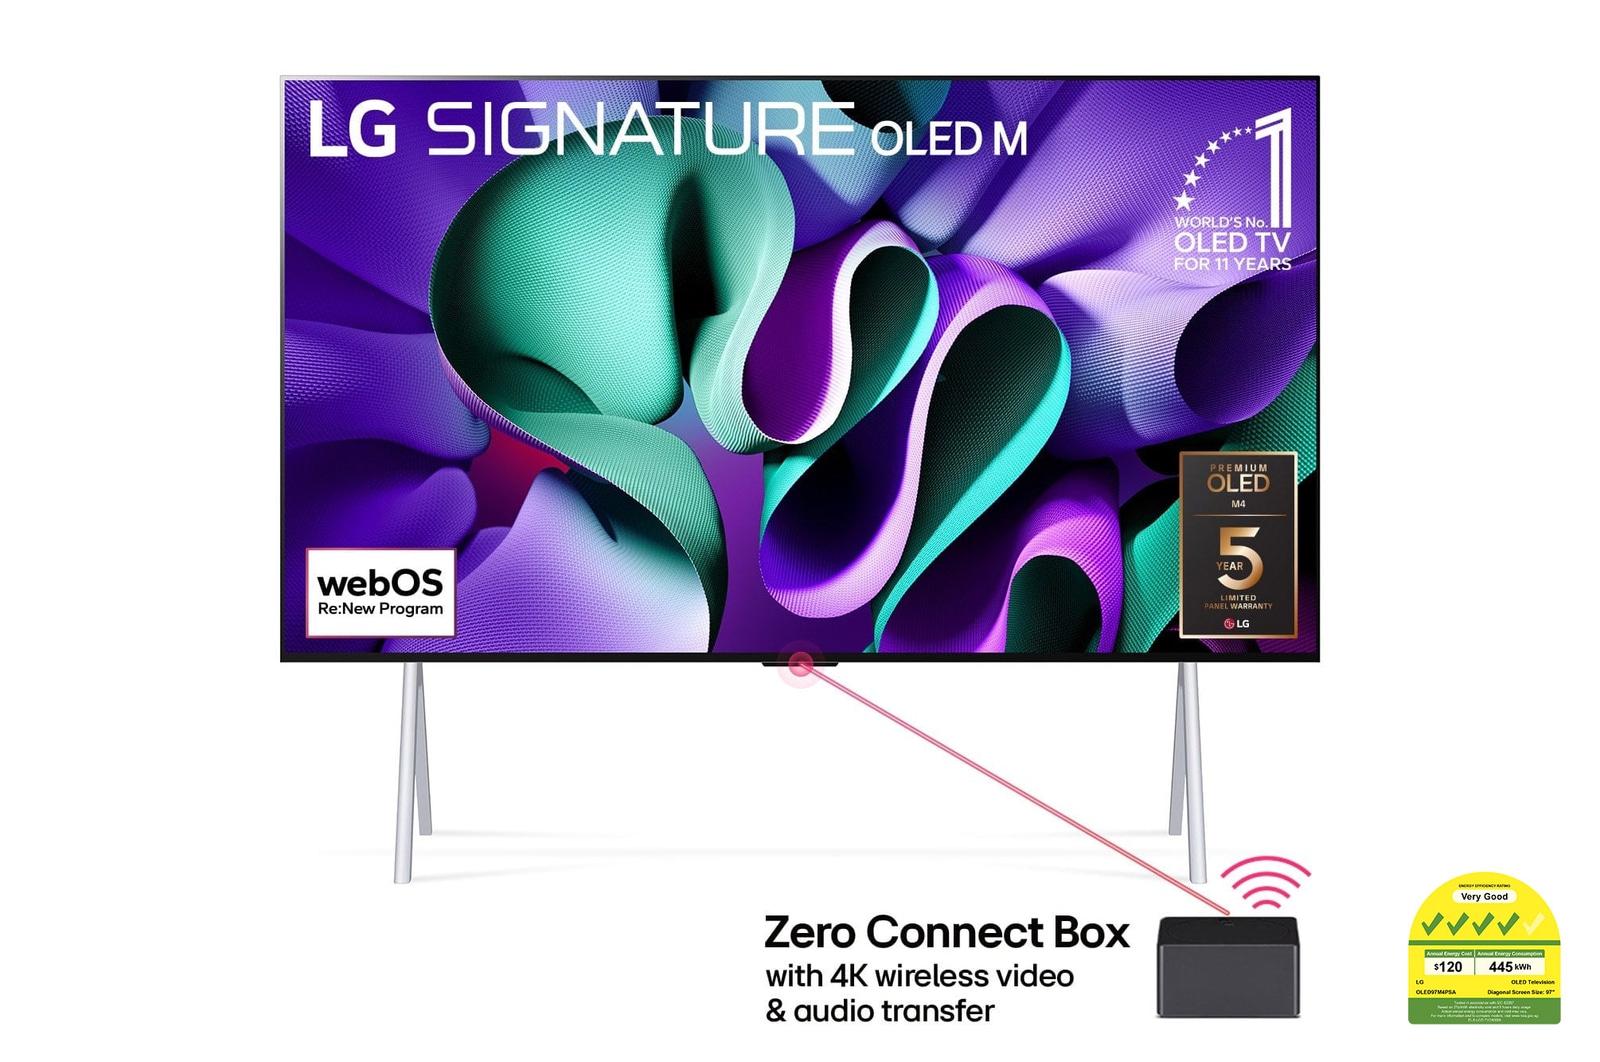 Front view with LG OLED TV, OLED M4 SIGNATURE on a stand, 11 Years of world number 1 OLED Emblem, webOS Re:New Program logo, and a Zero Connect Box with 4K wireless video & audio transfer connected to a TV, and a Wi-Fi signal coming out of the box